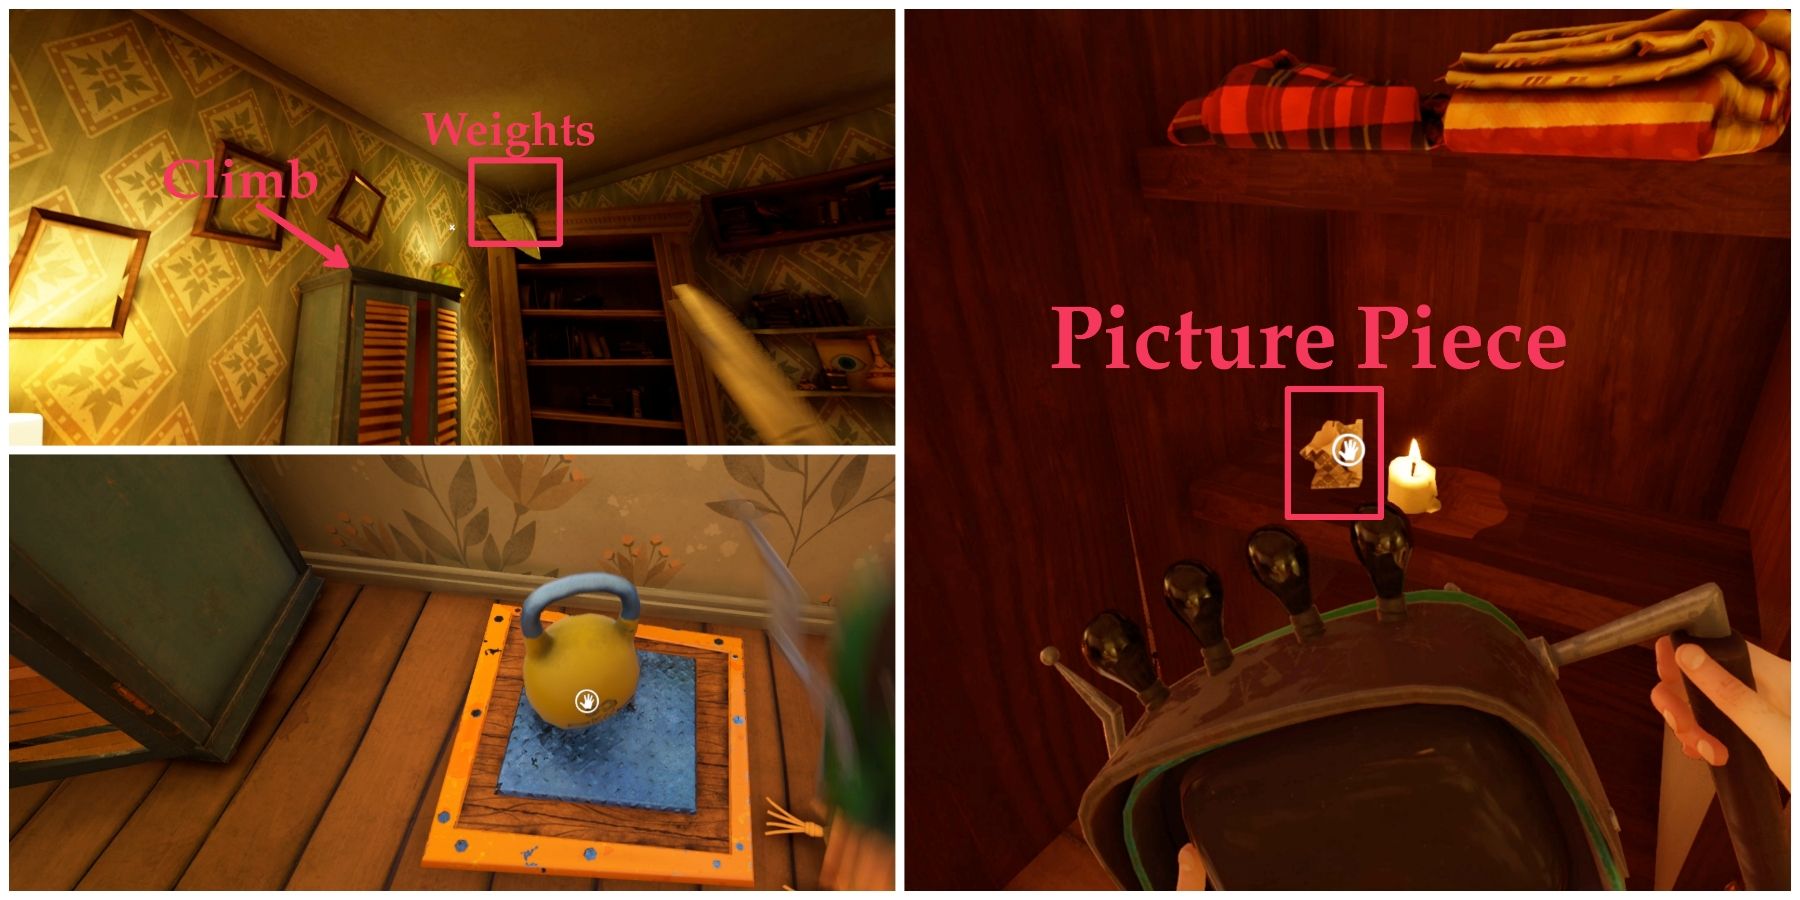 second picture piece location in hello neighbor 2